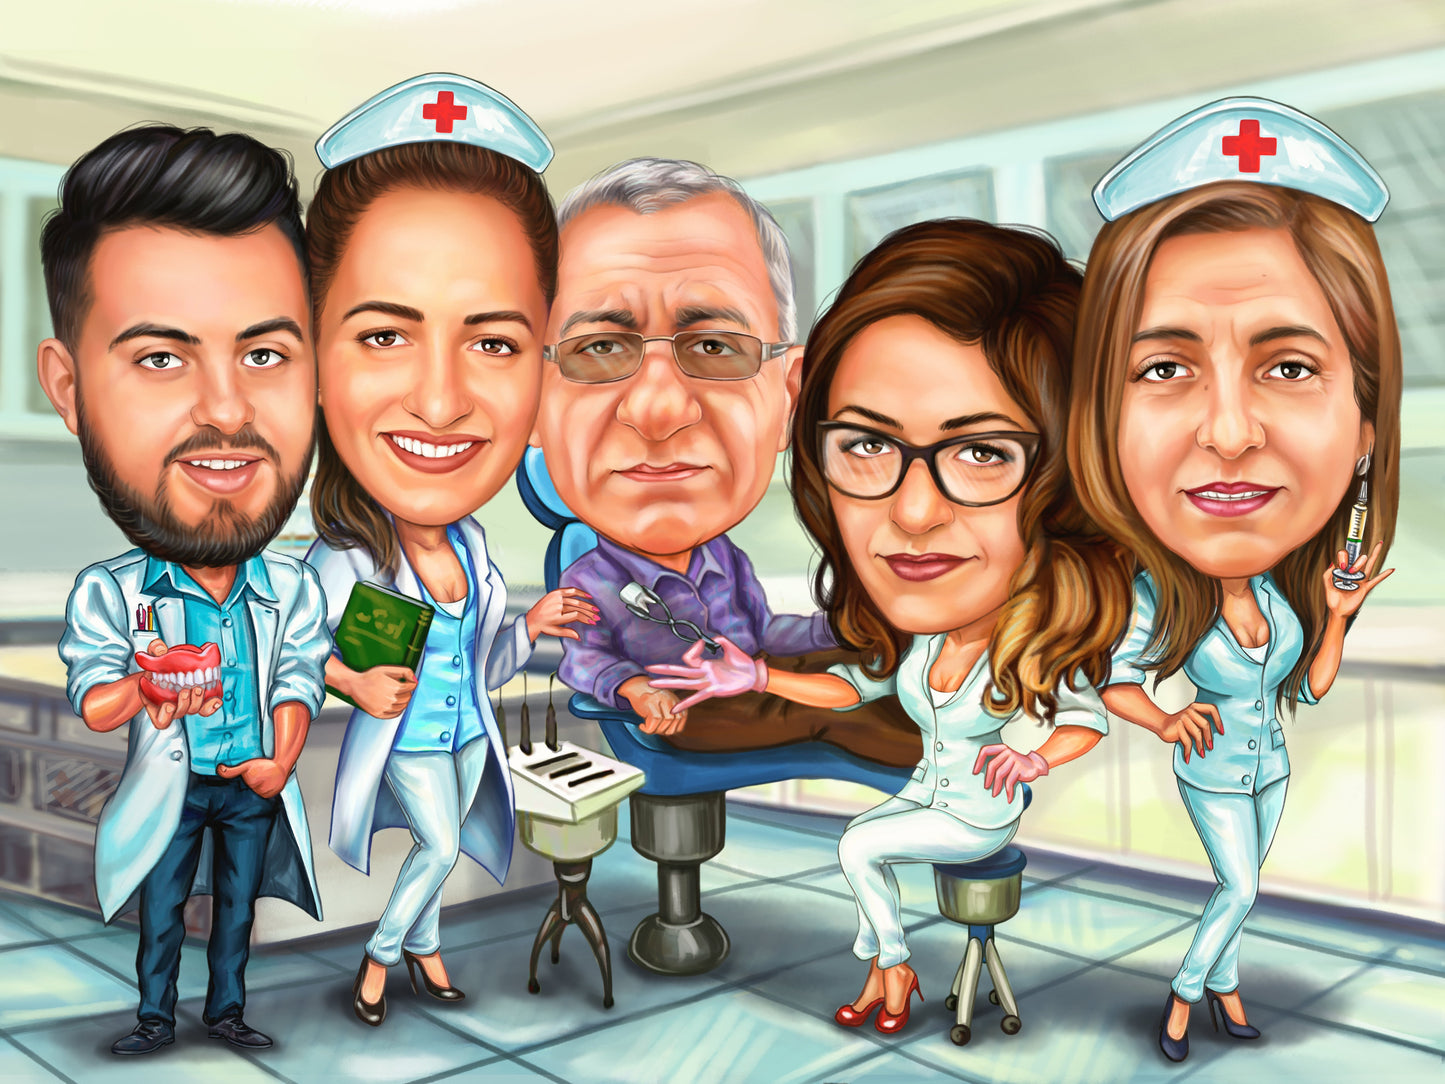 Health on the first place at work caricature